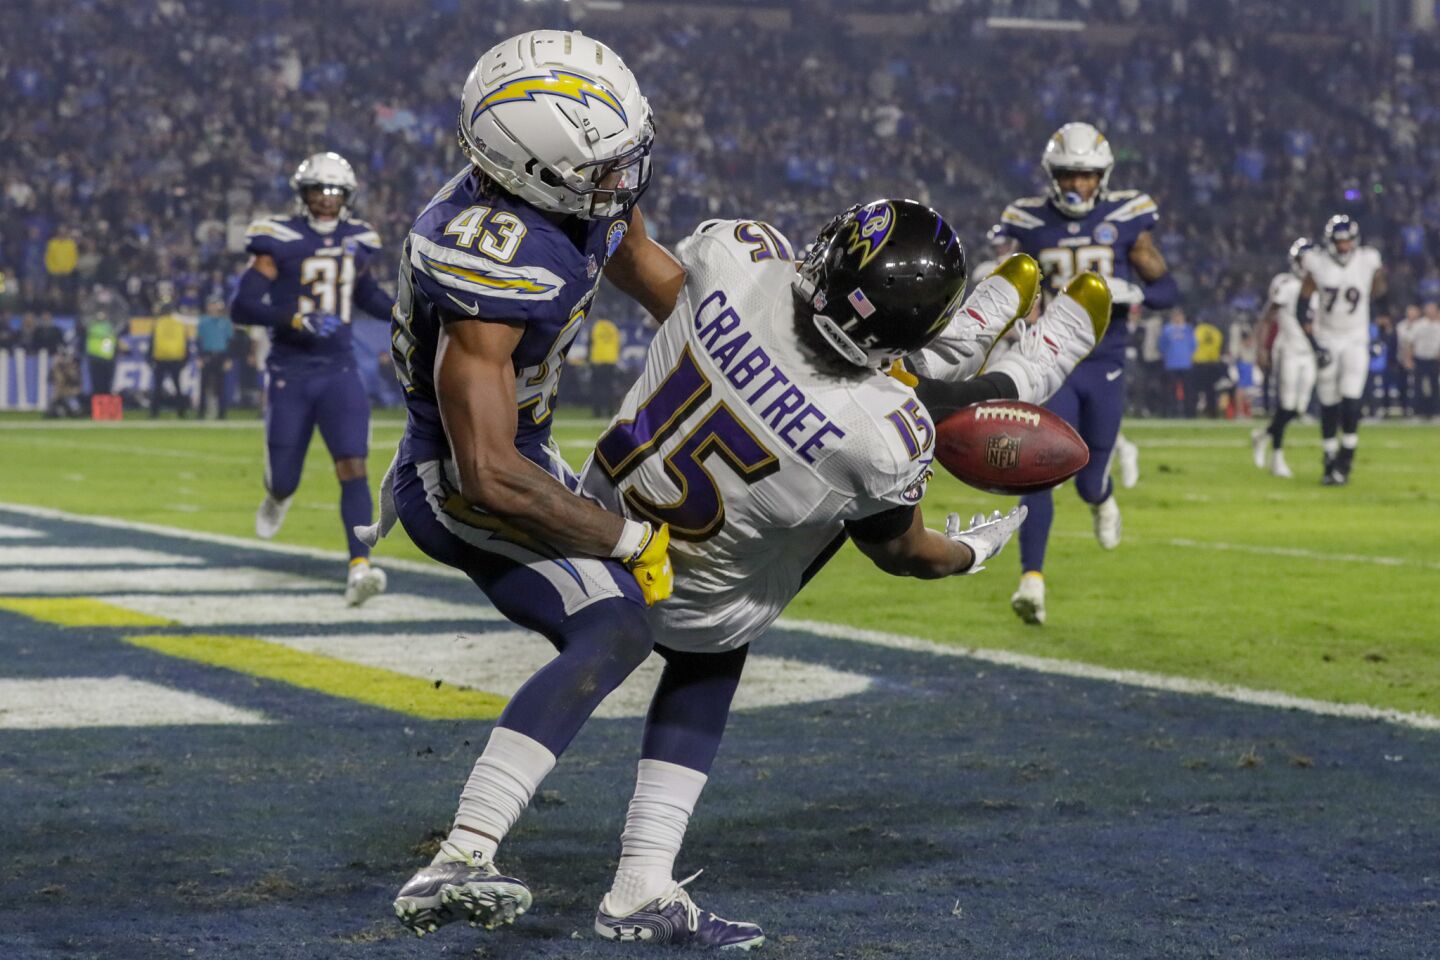 Chargers cornerback Michael Davis knocks the ball from Ravens receiver Michael Crabtree, preventing a first half touchdown at StubHub Center.